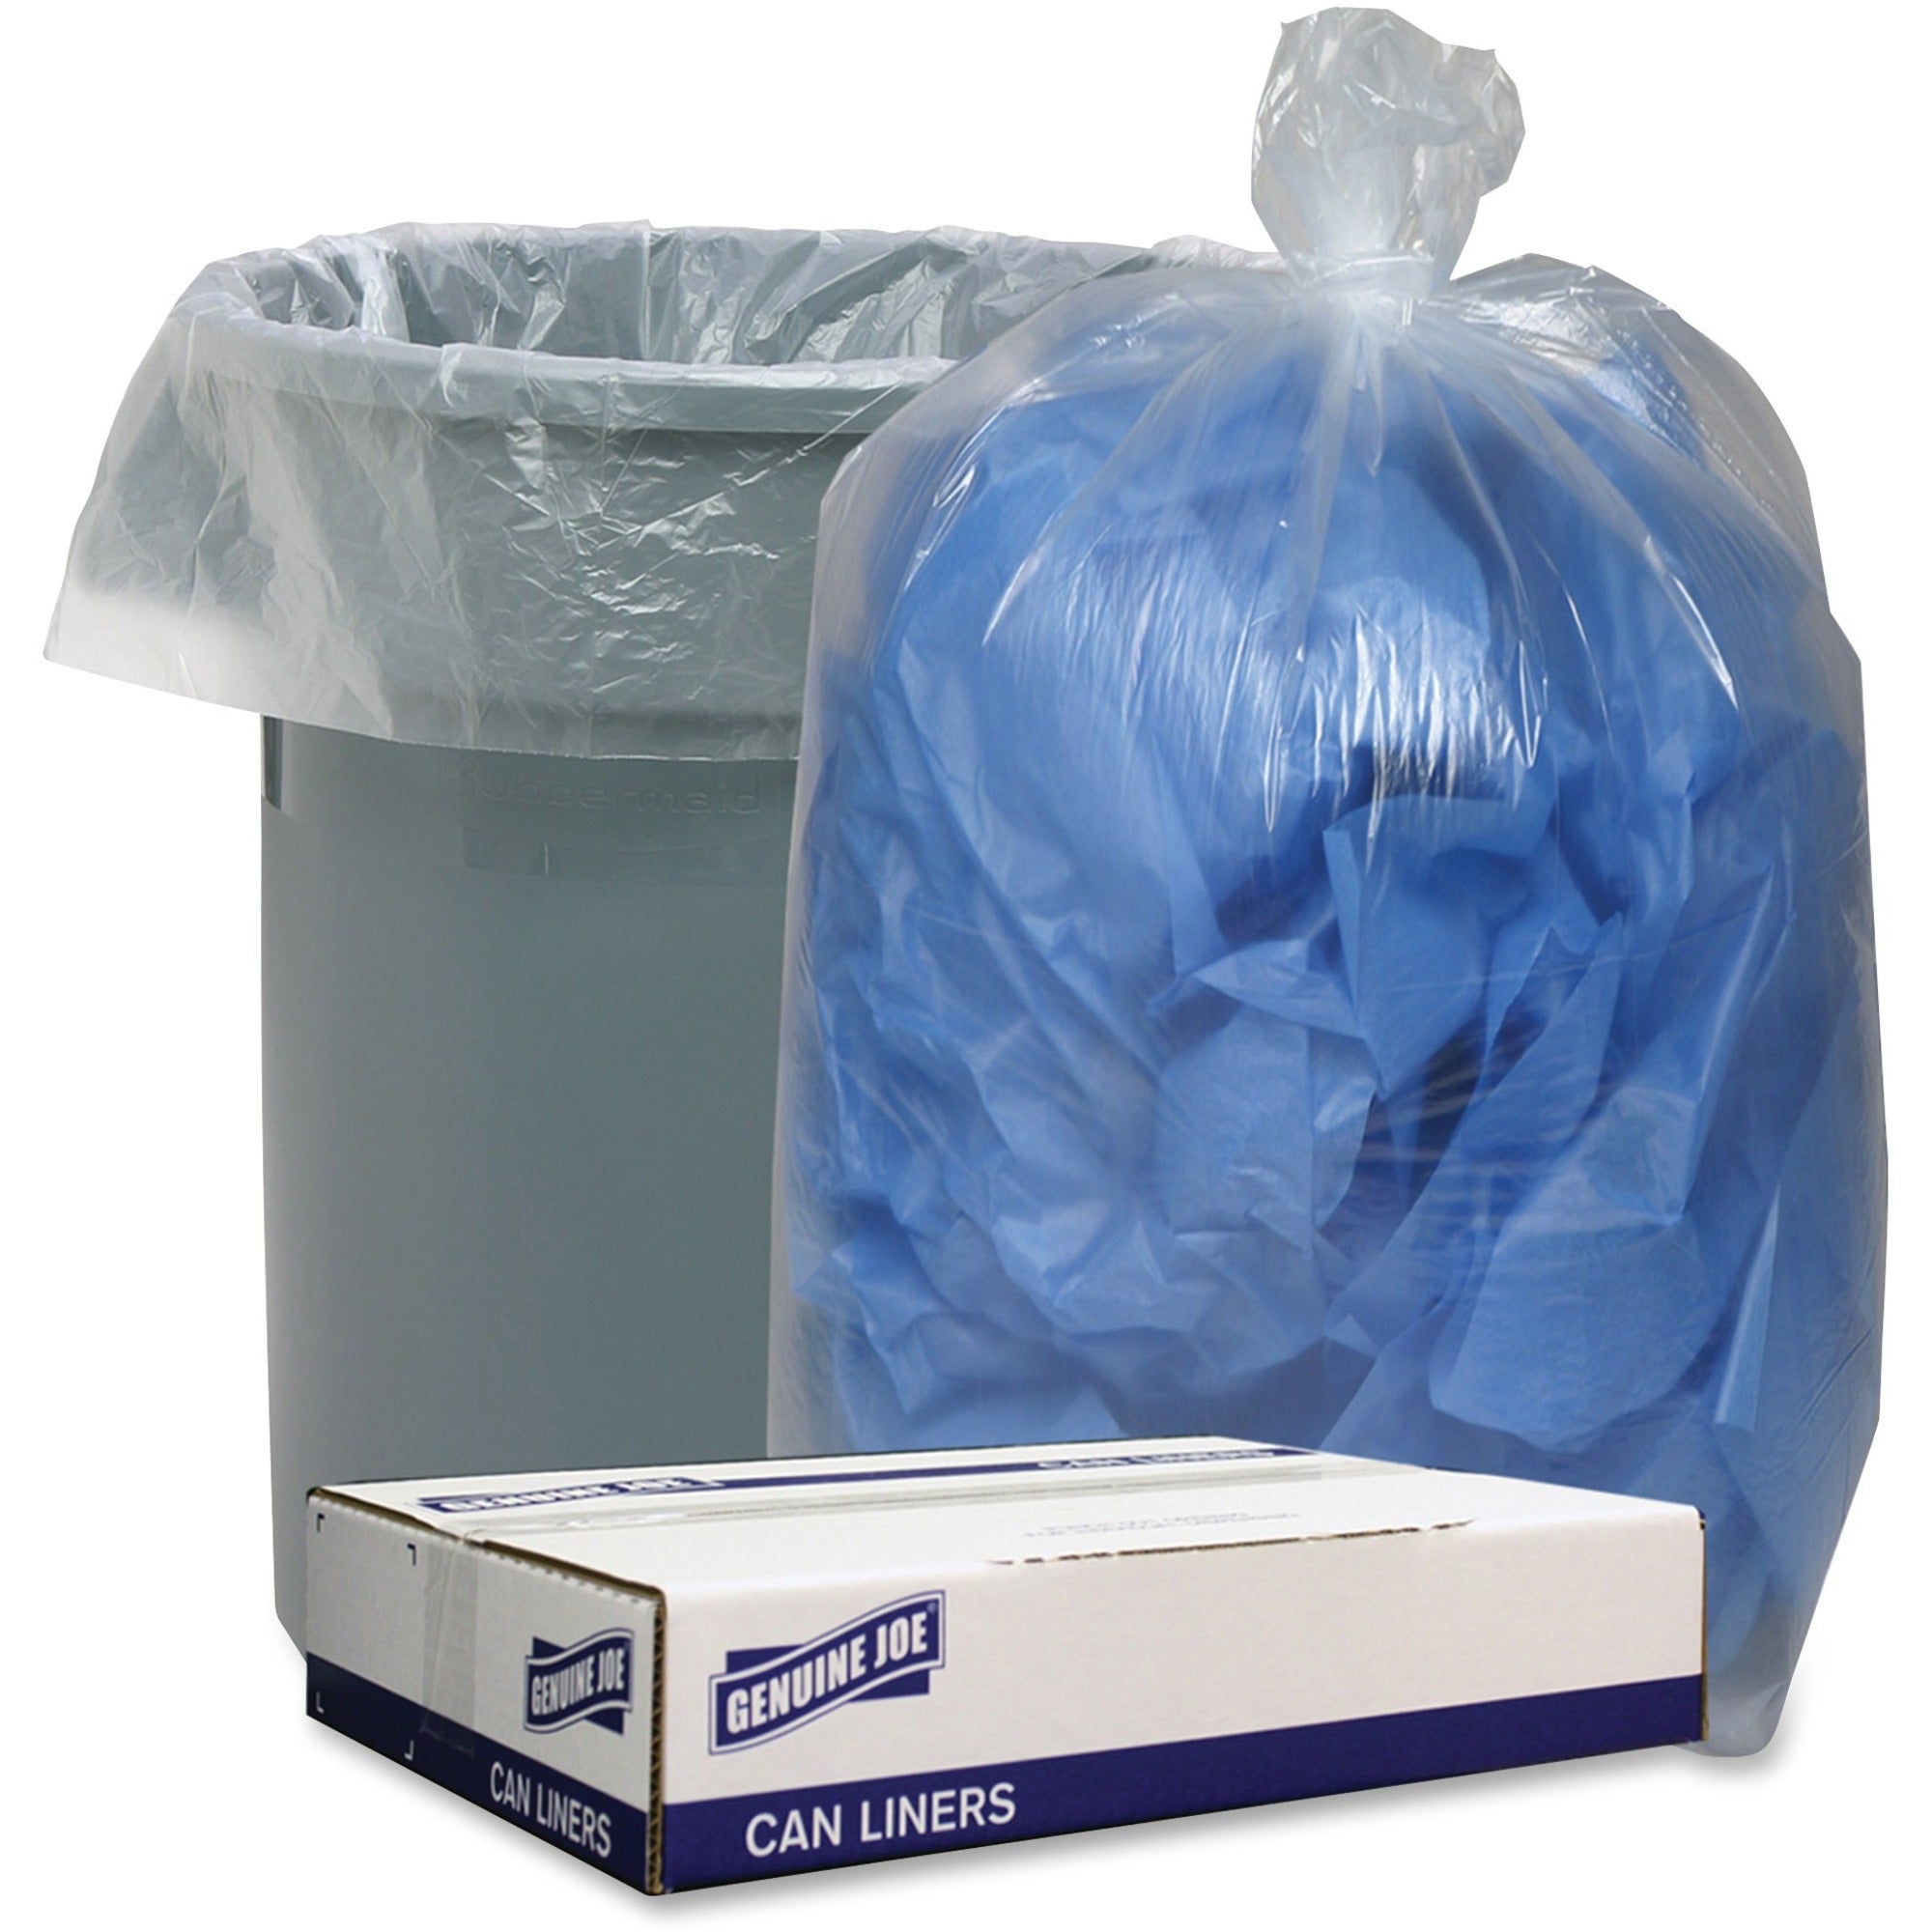 genuine-joe-low-density-can-liners-33-gal-capacity-33-width-x-39-length-140-mil-36-micron-thickness-low-density-clear-100-carton-recycled_gjo29129 - 1